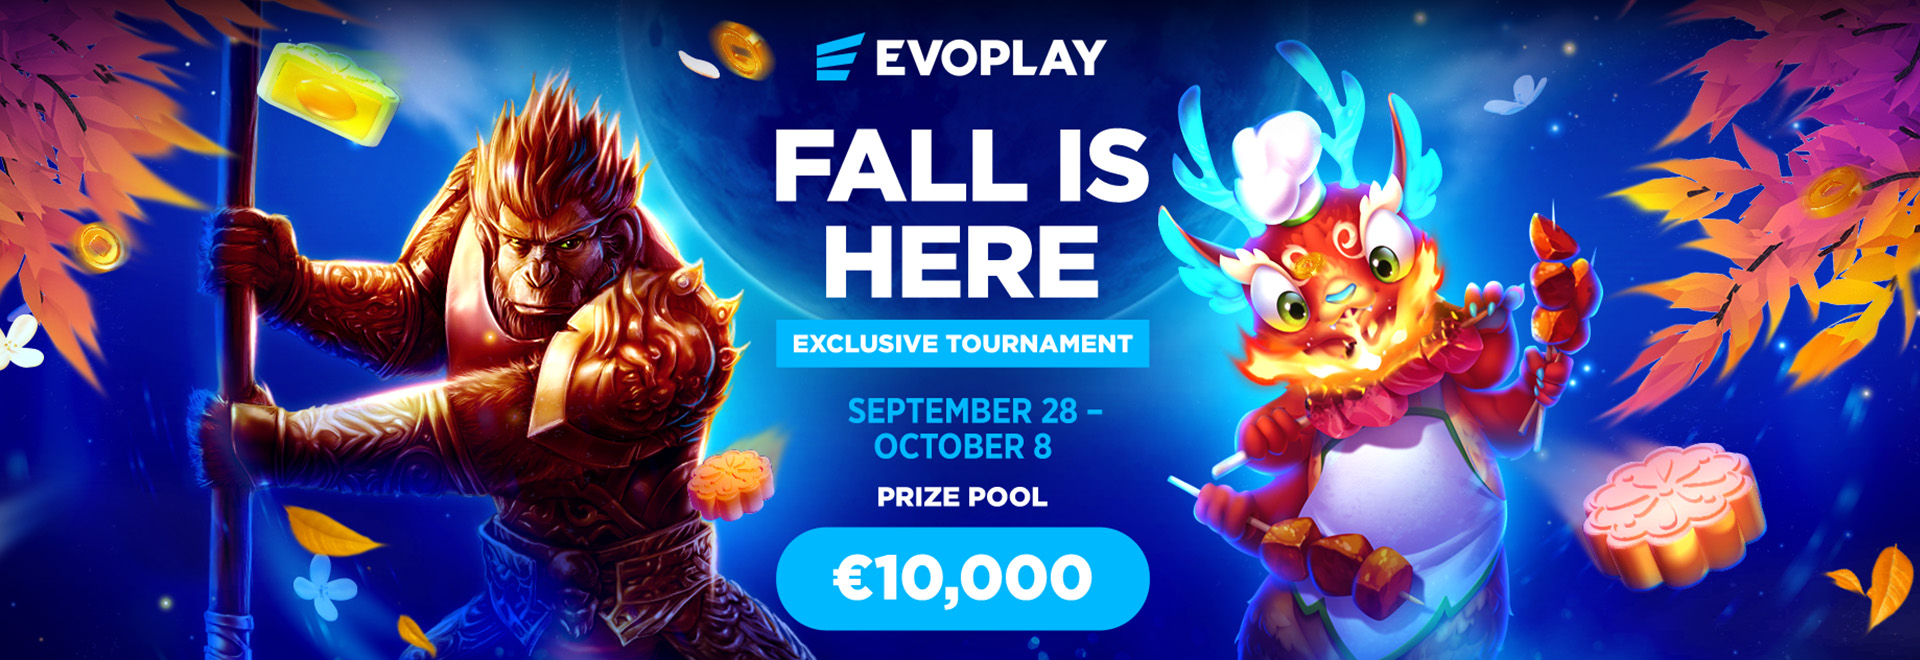 Evoplay Tournament: "Fall is Here"